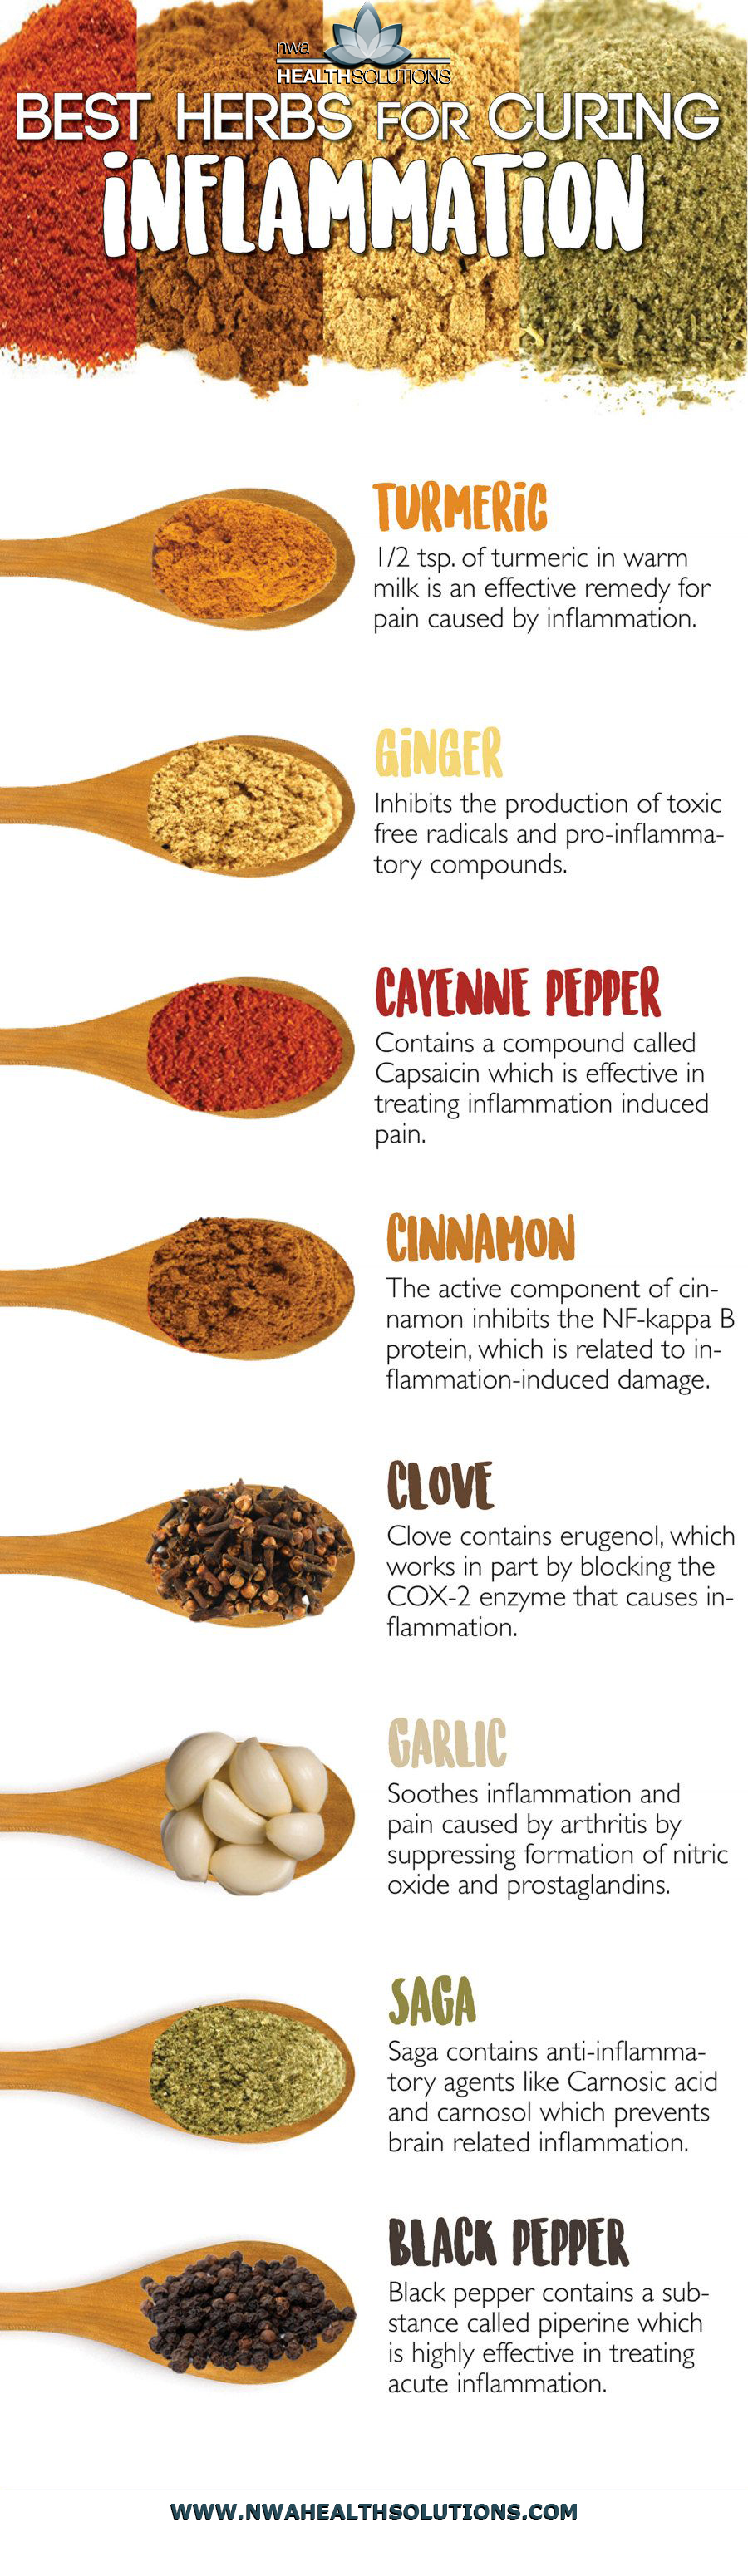 Top anti-inflammatory spices